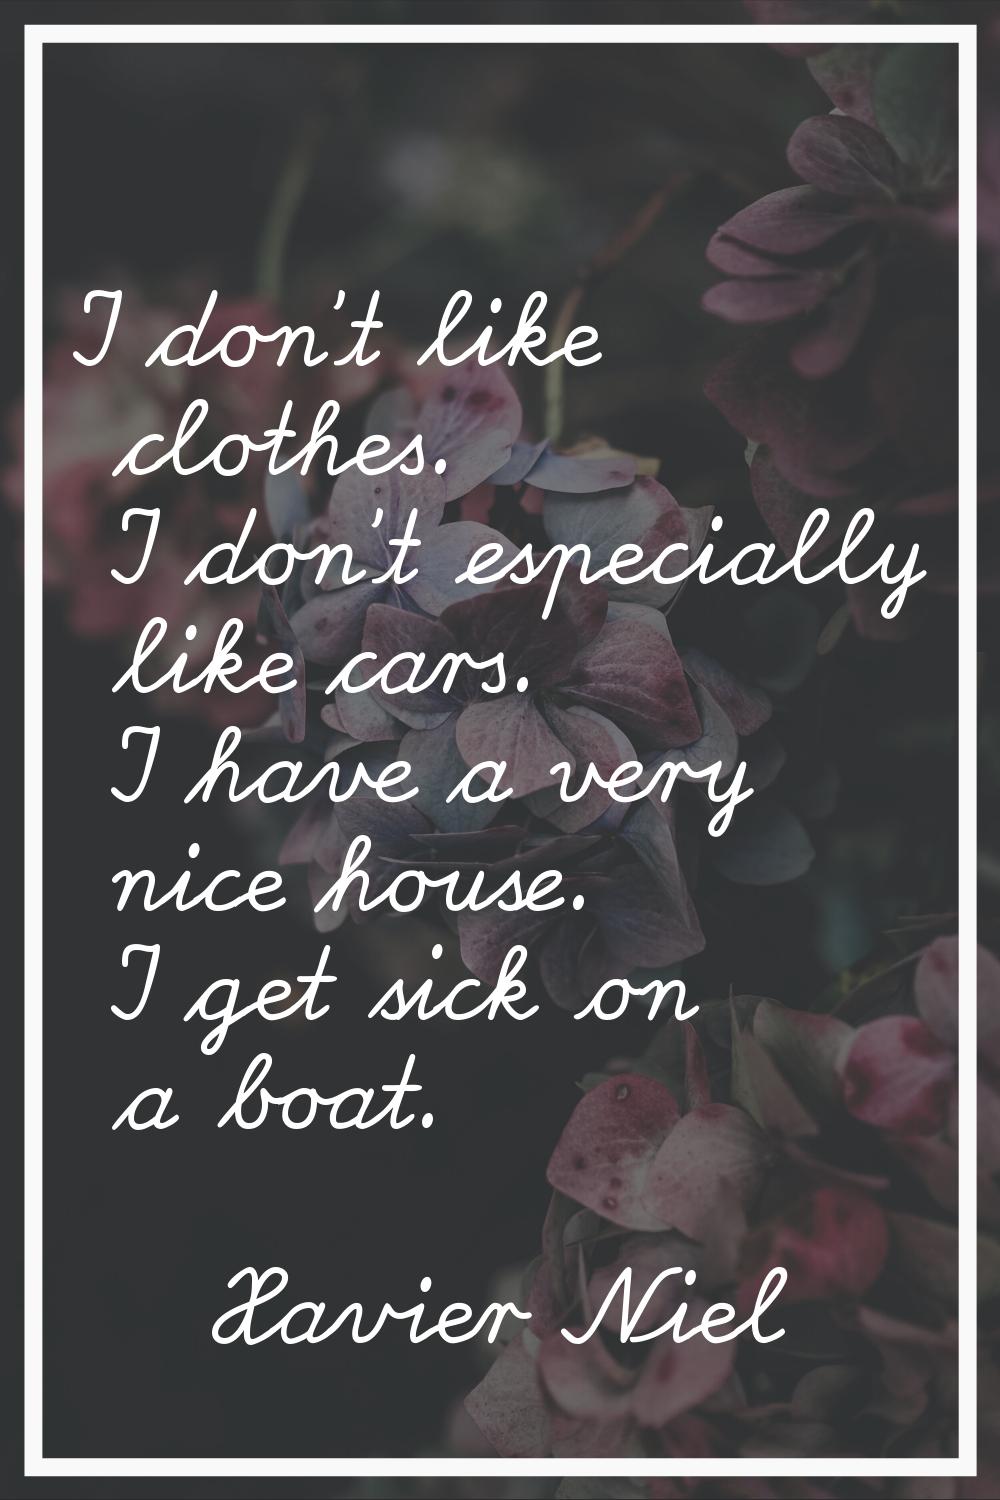 I don't like clothes. I don't especially like cars. I have a very nice house. I get sick on a boat.